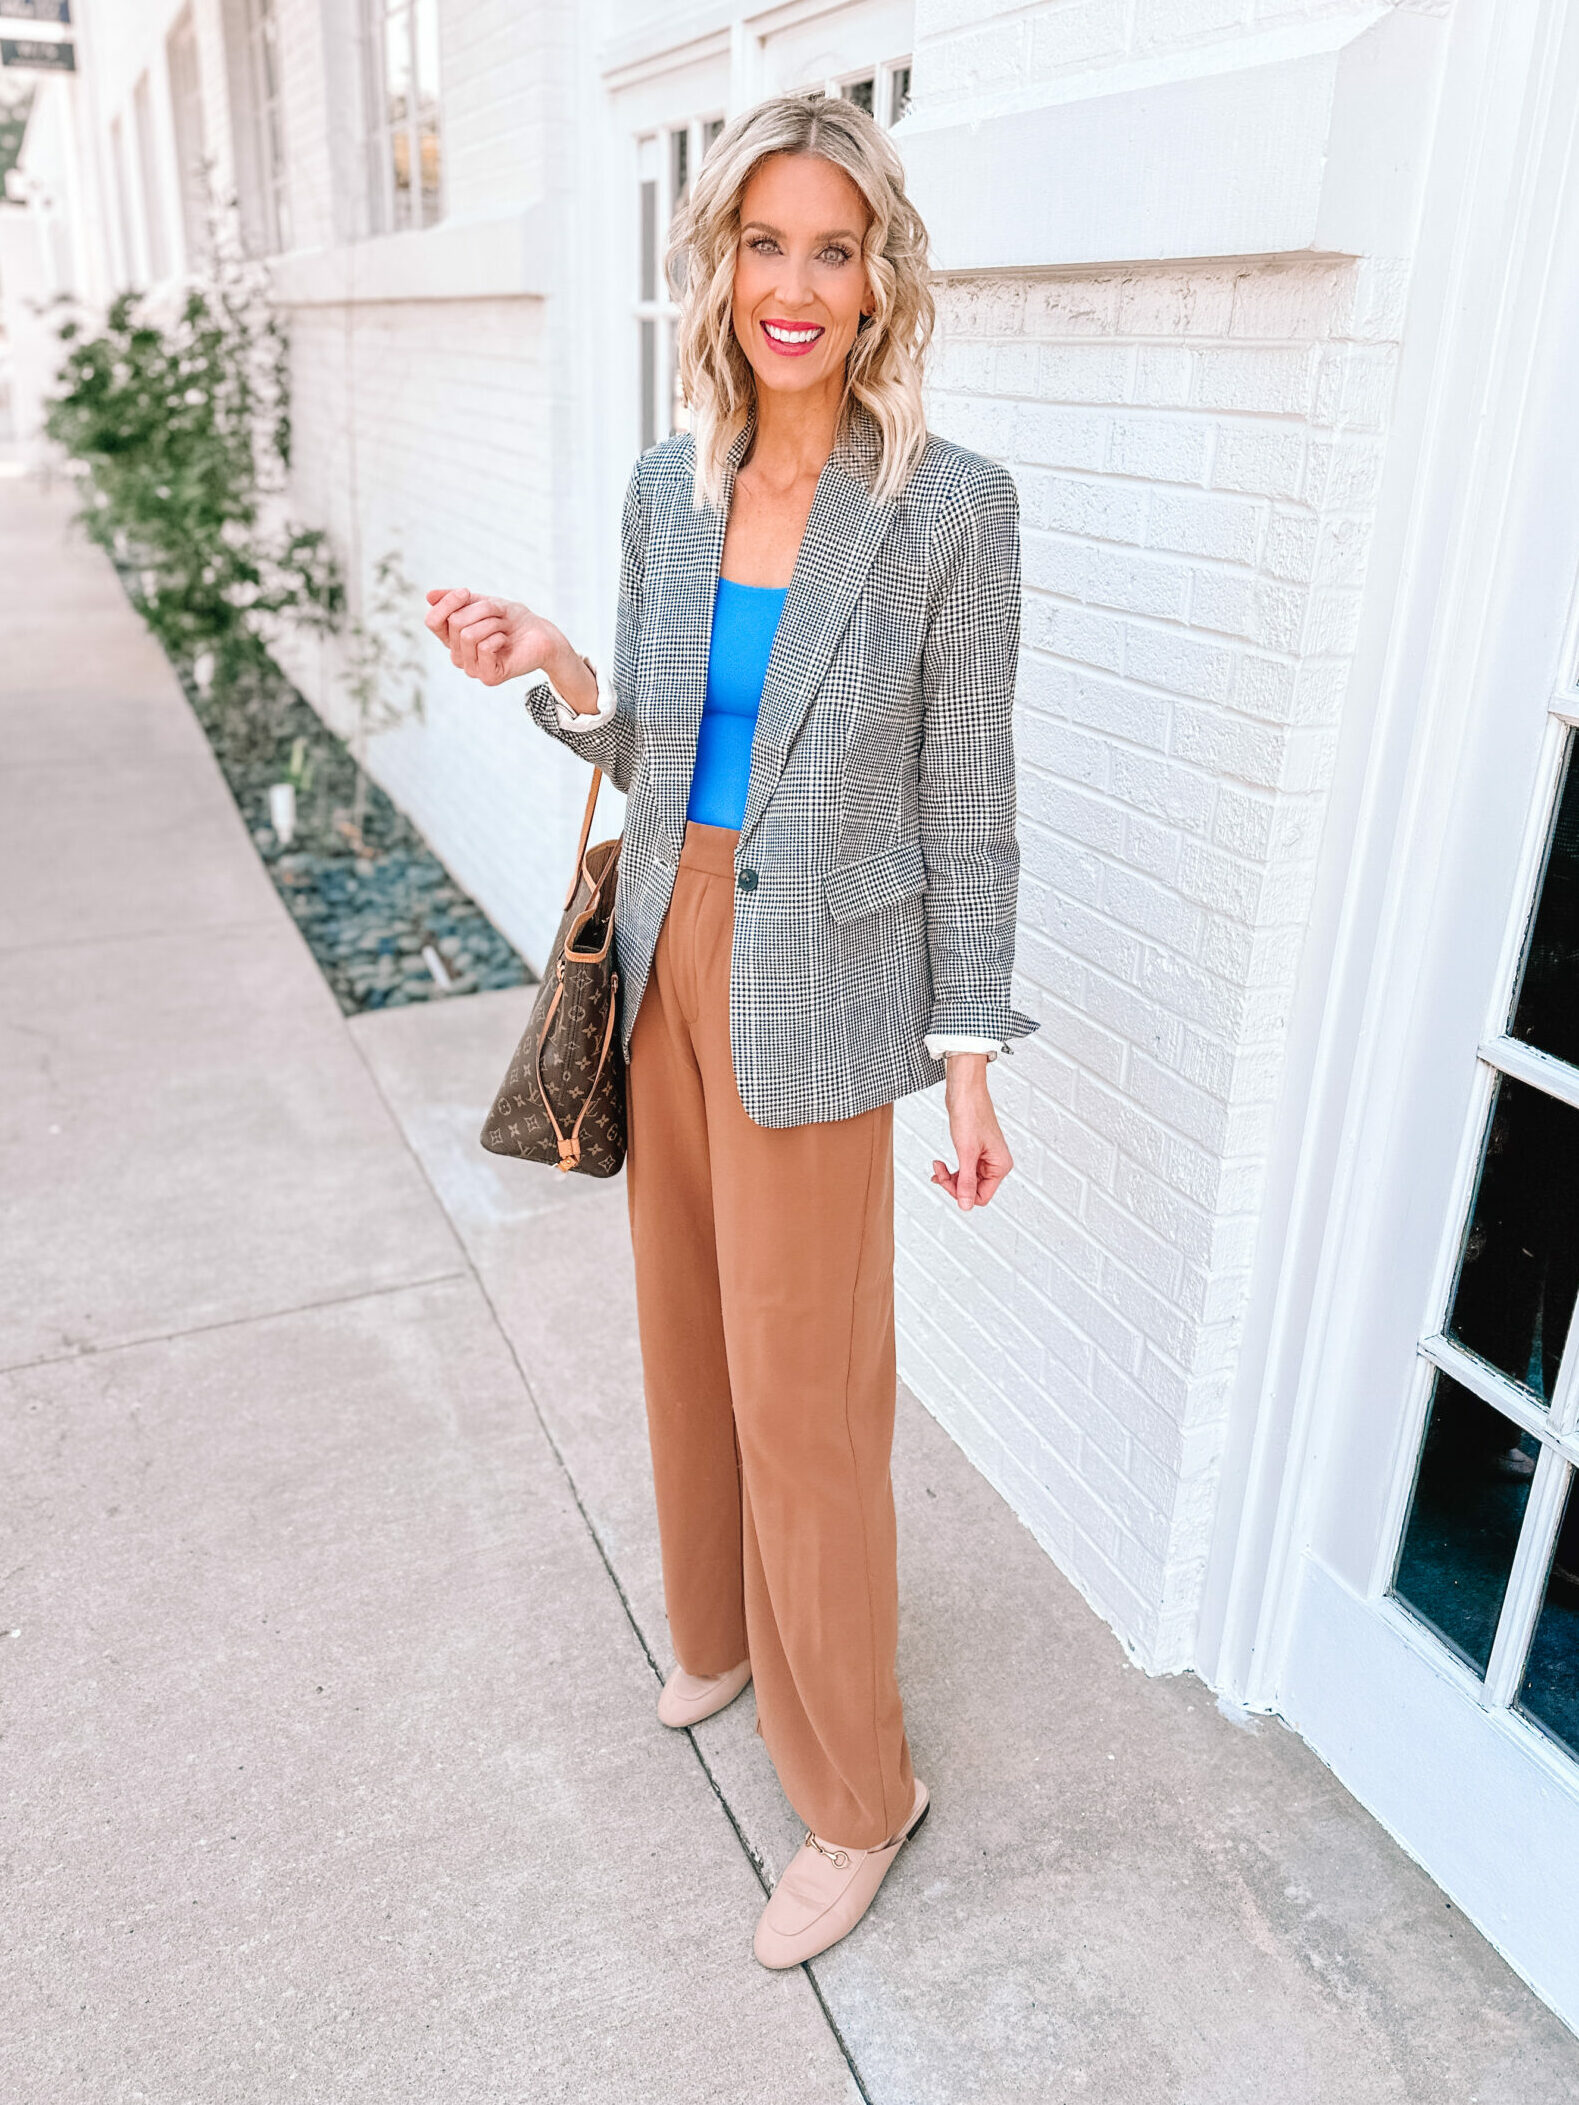 Do you work in as business casual work environment everyday and need a little work outfit idea inspiration? Today I am coming to you with a chic wide leg pant fall work outfit idea! 